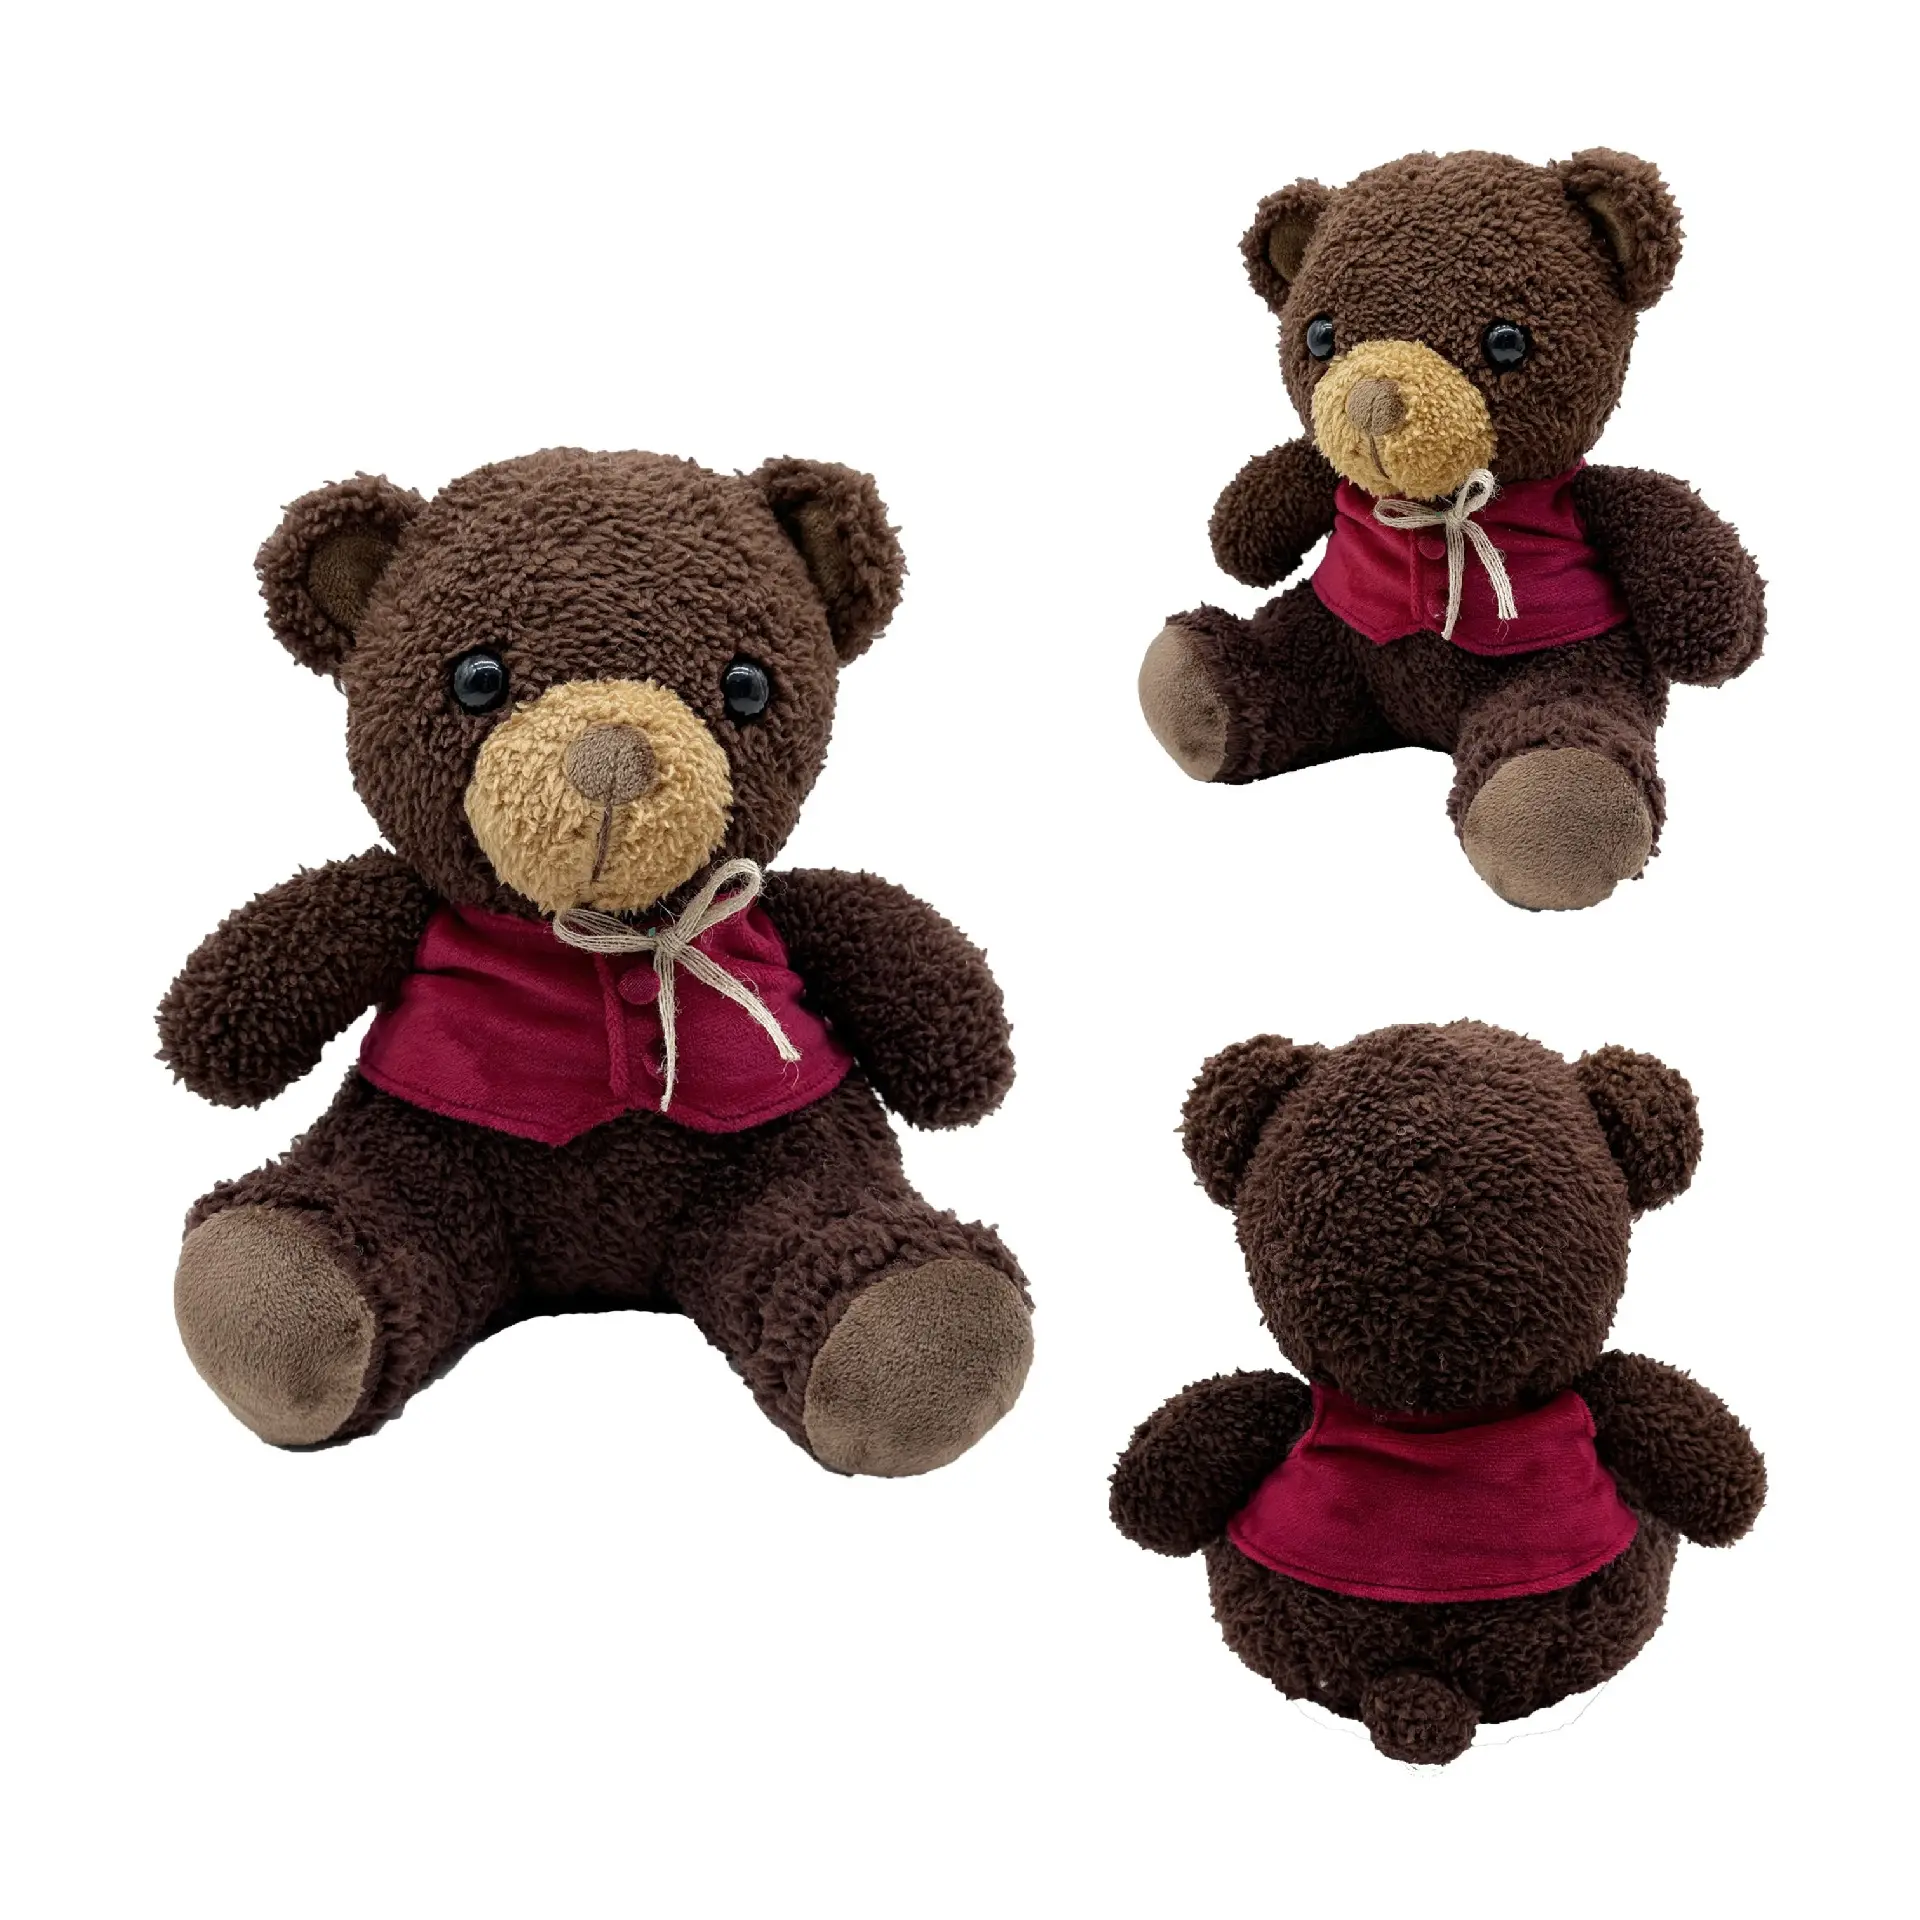 New Arrival Imaginary Chauncey Unisex bear Stuffed Animal Doll Motion Poster and Sneak Peek Filled with PP Cotton